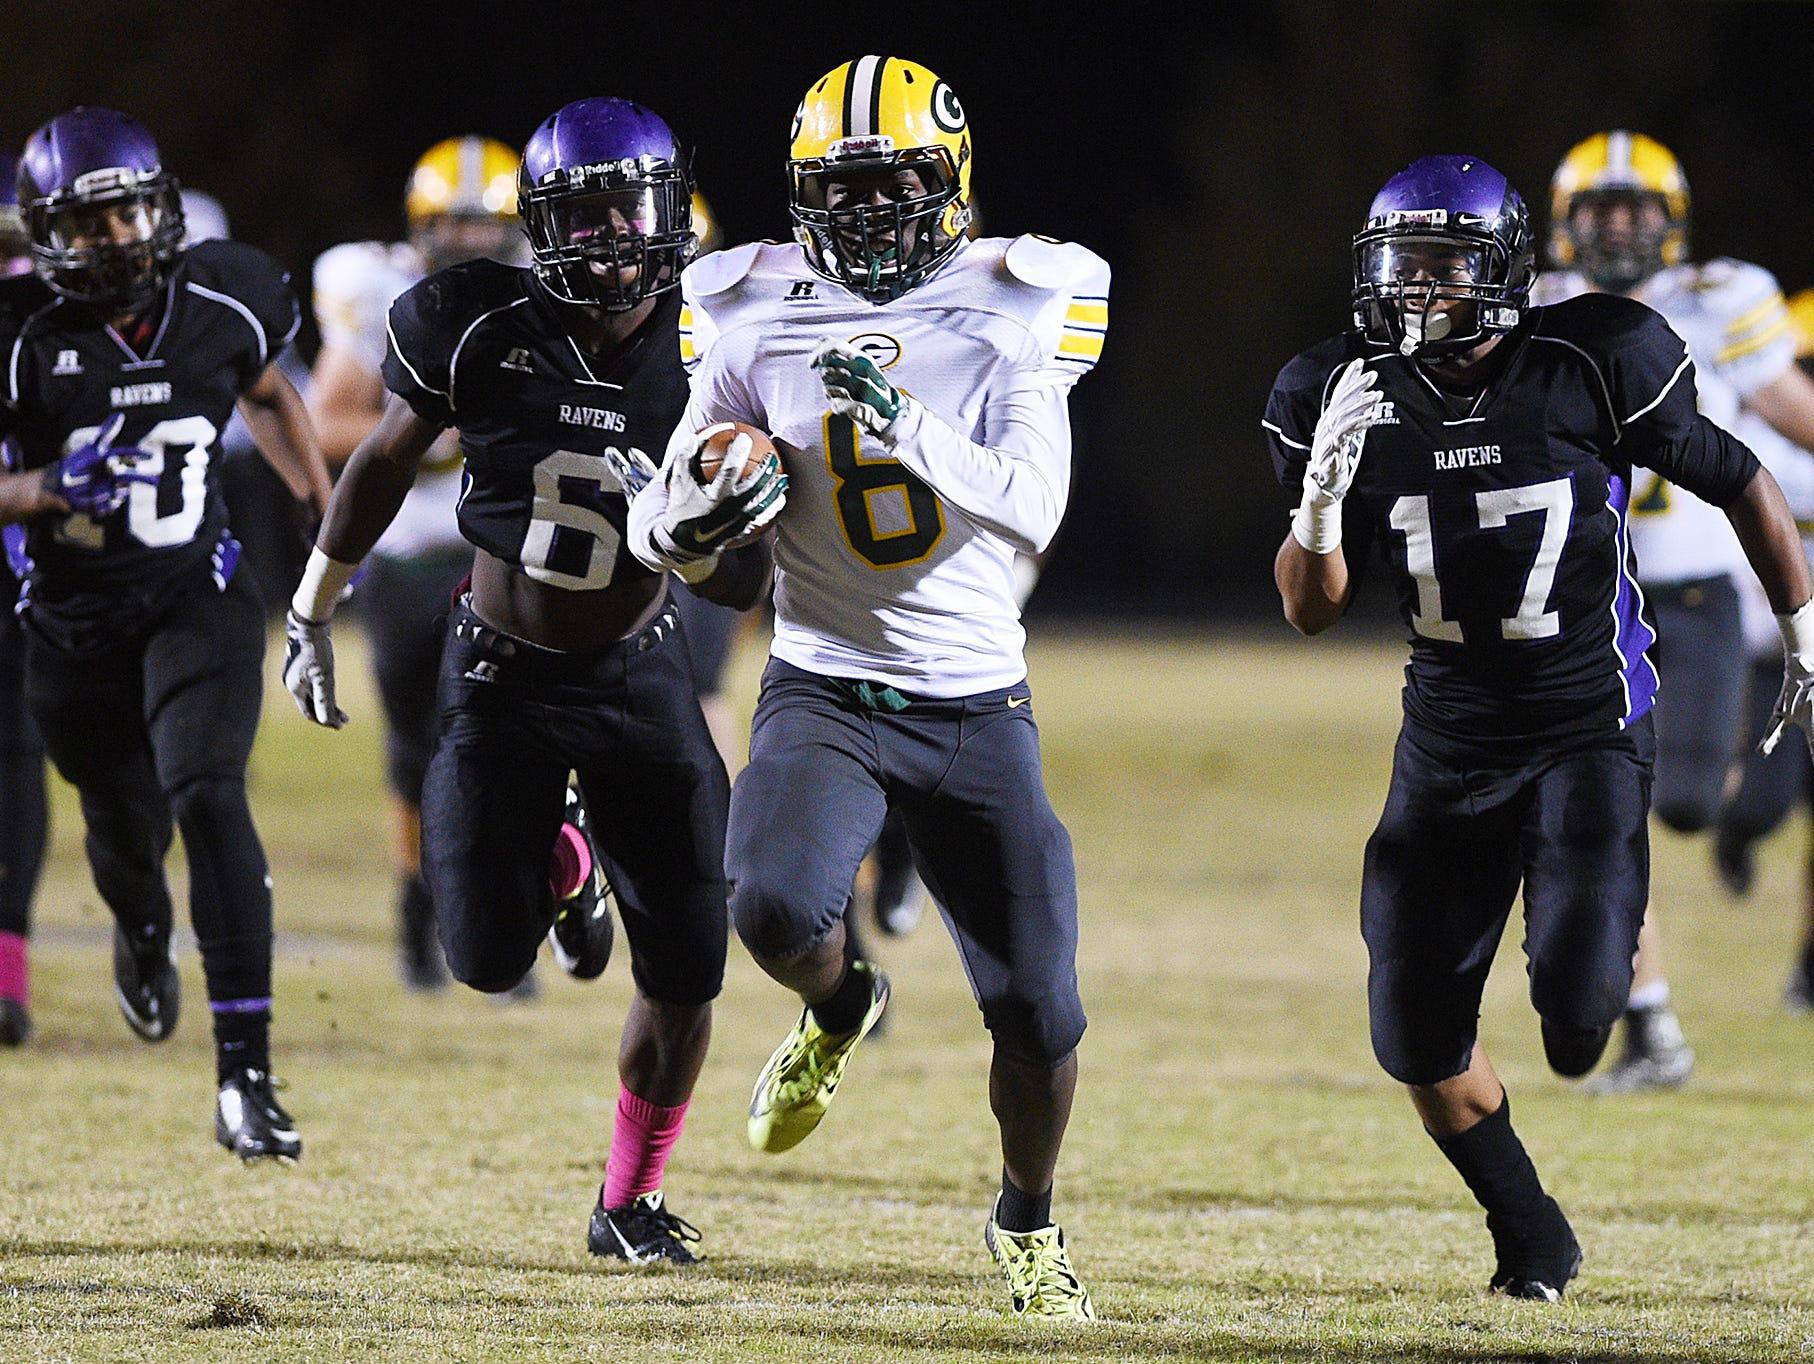 Gallatin HIgh senior wide receiver Izell Williams (8) caught a team-high four passes for 61 yards in Friday evening's 40-34 loss at Cane Ridge.